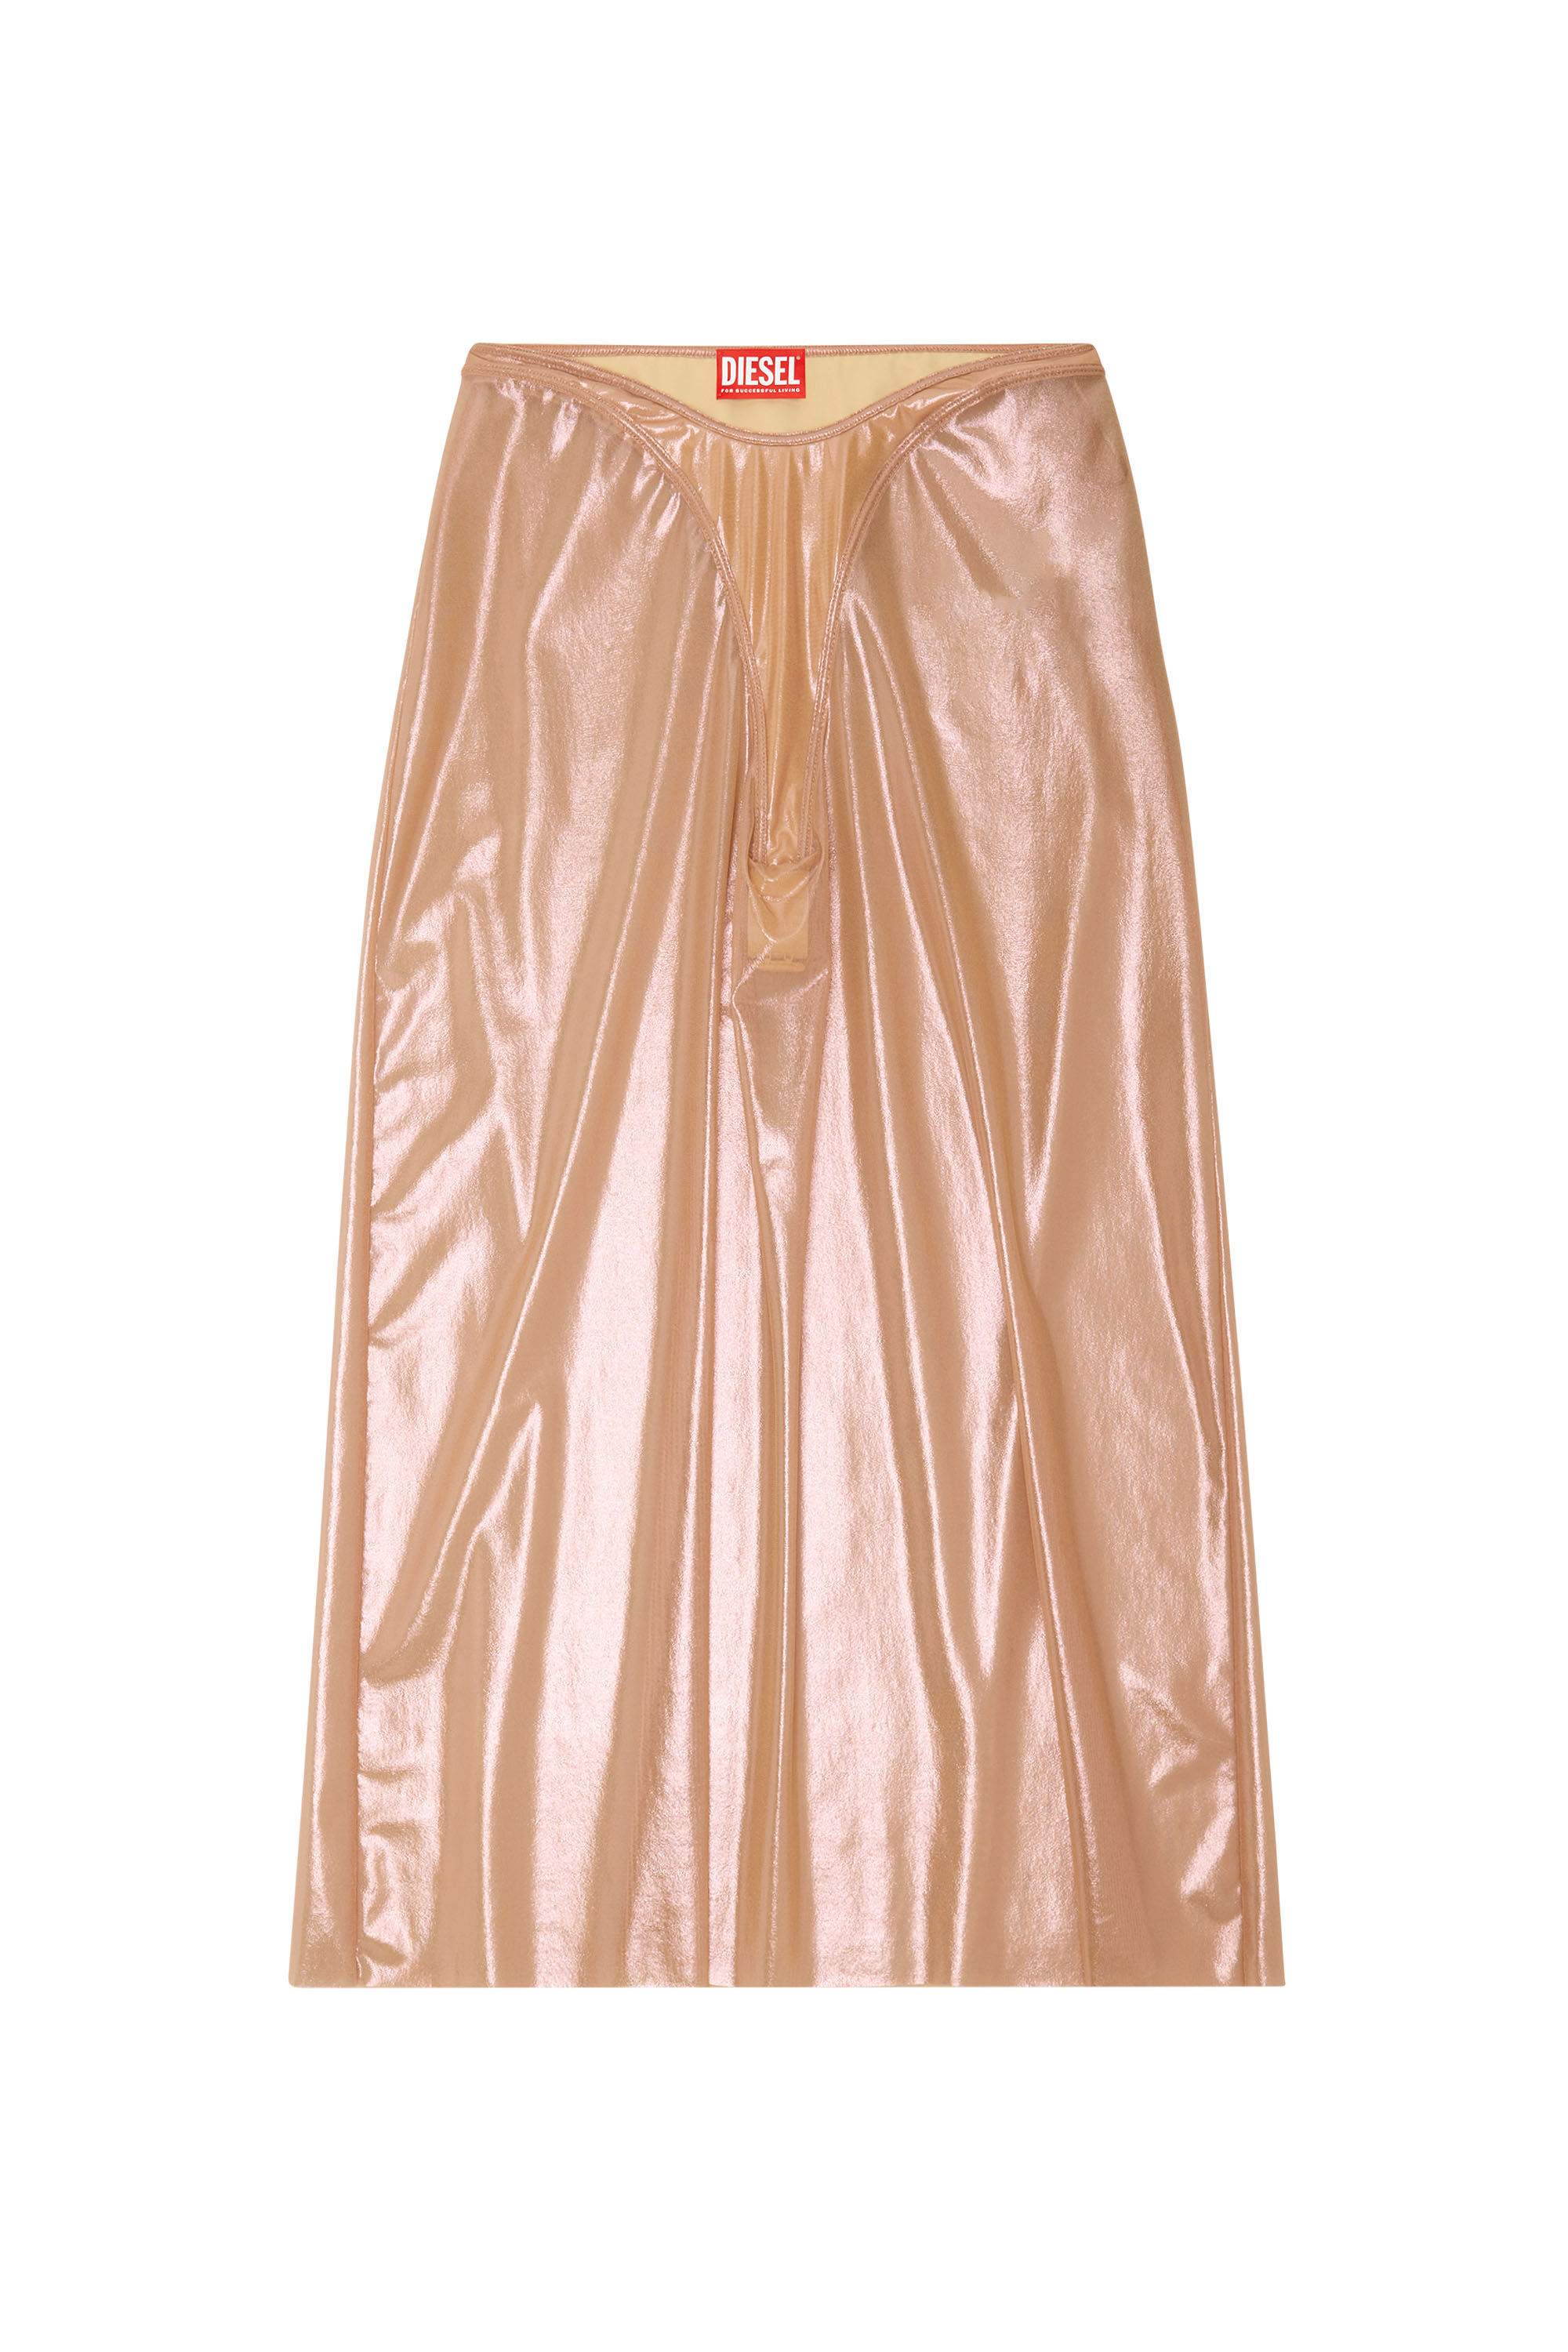 Diesel - O-MONI, Woman Sheer midi skirt in shiny coated tulle in Pink - Image 2